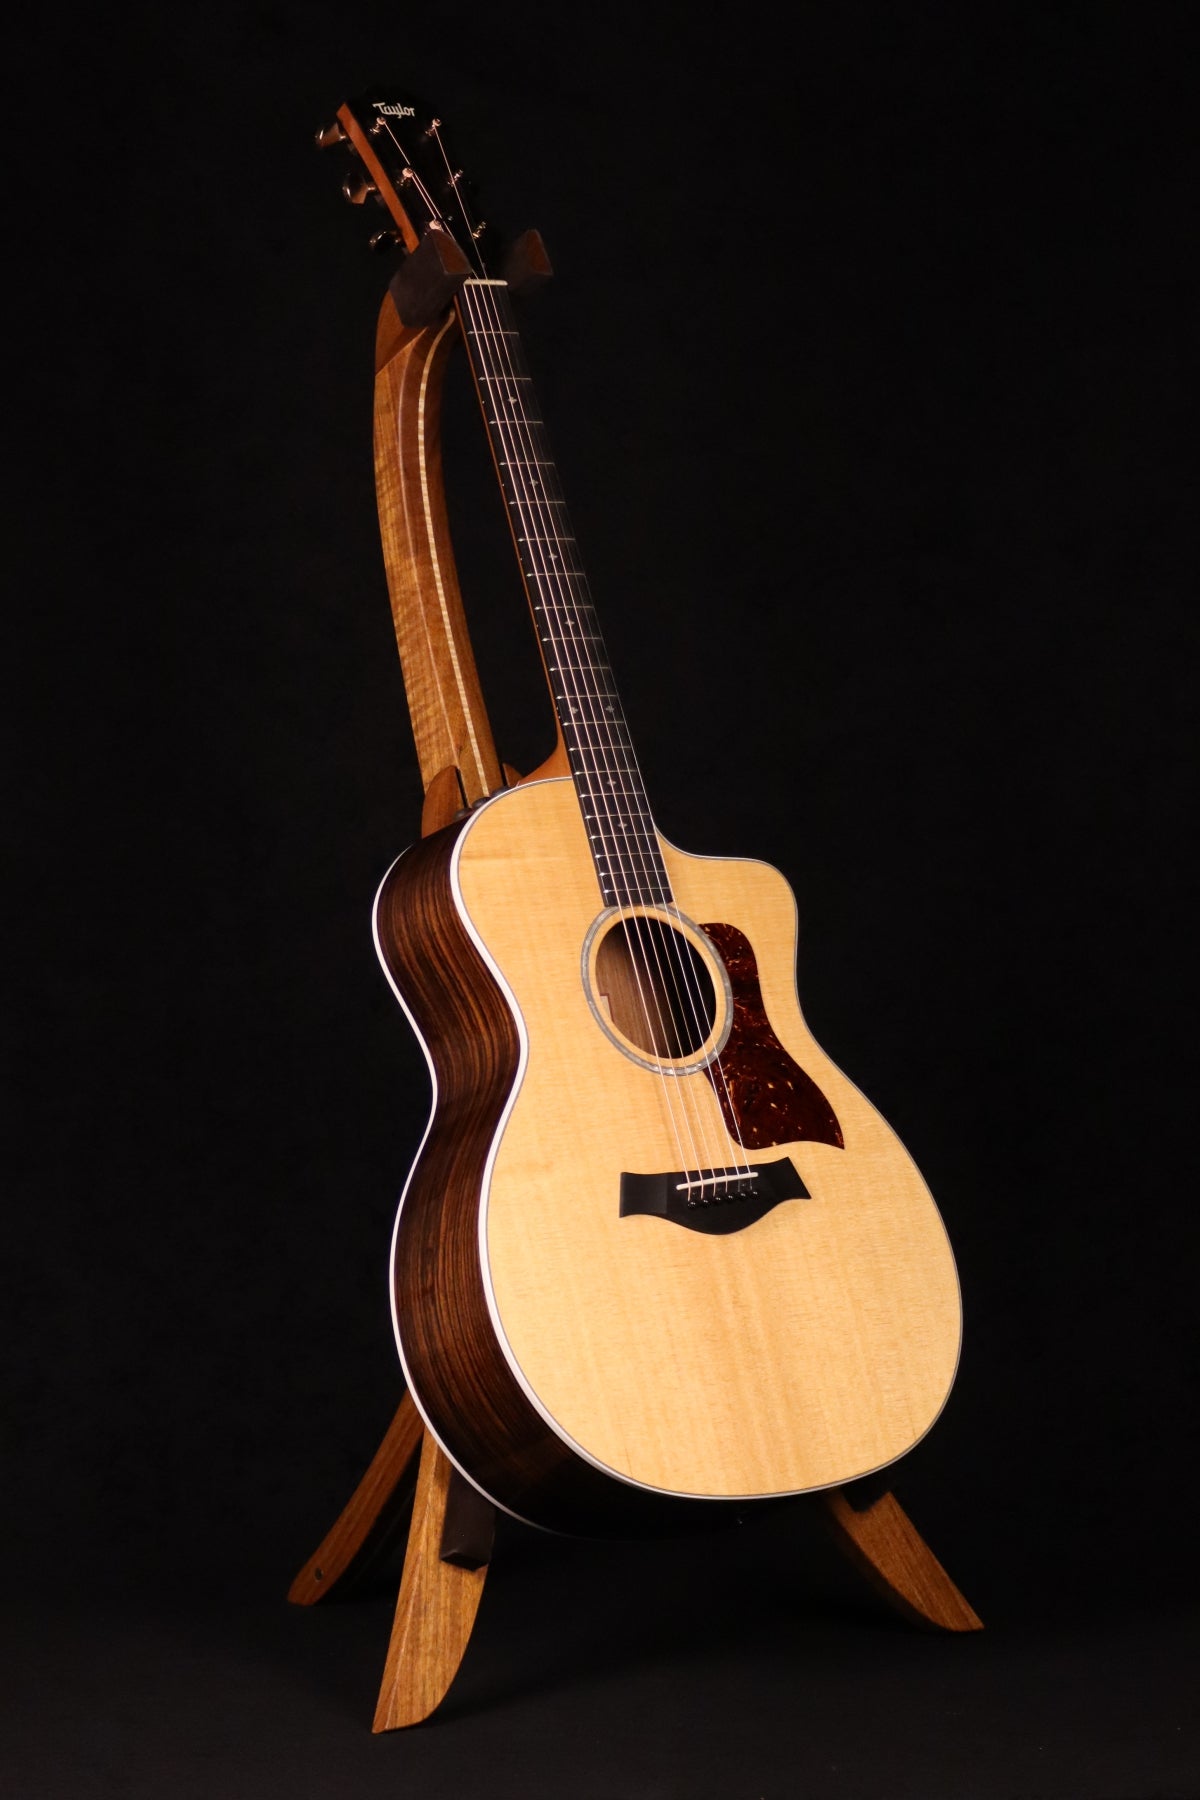 Folding sheuda ovangkol and curly maple wood guitar stand full front image with Taylor guitar